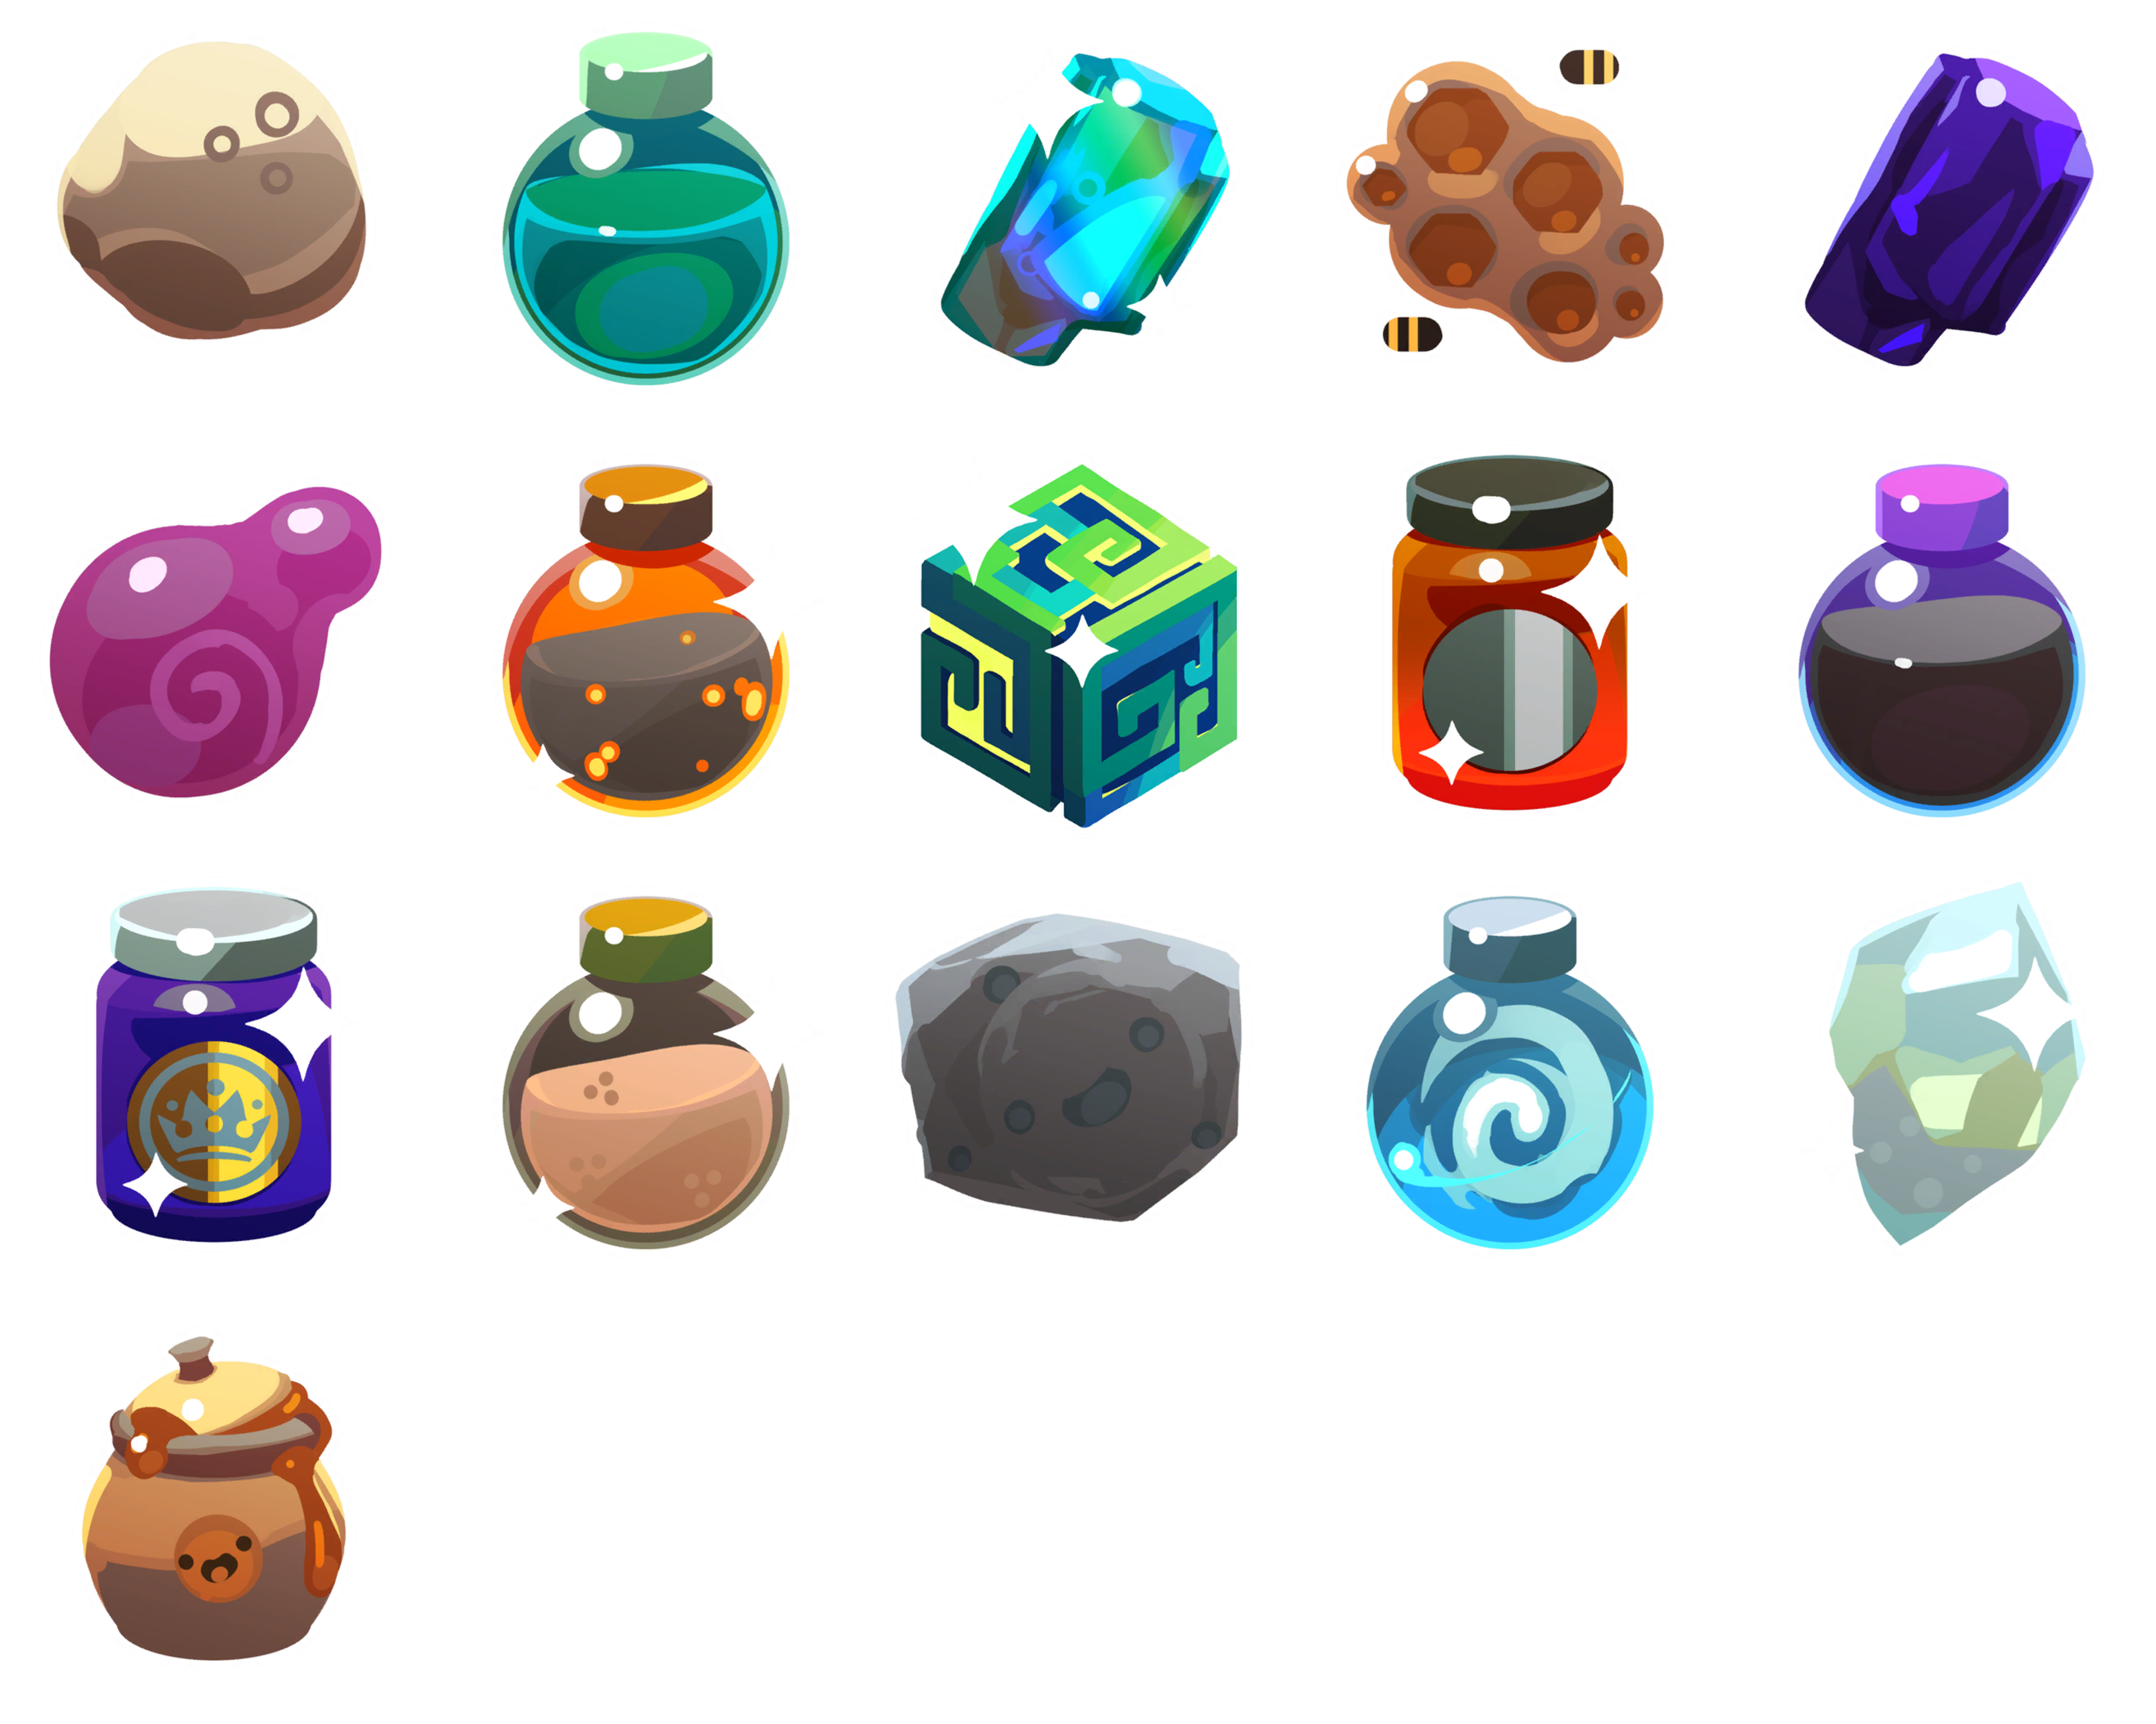 Crafting Icons